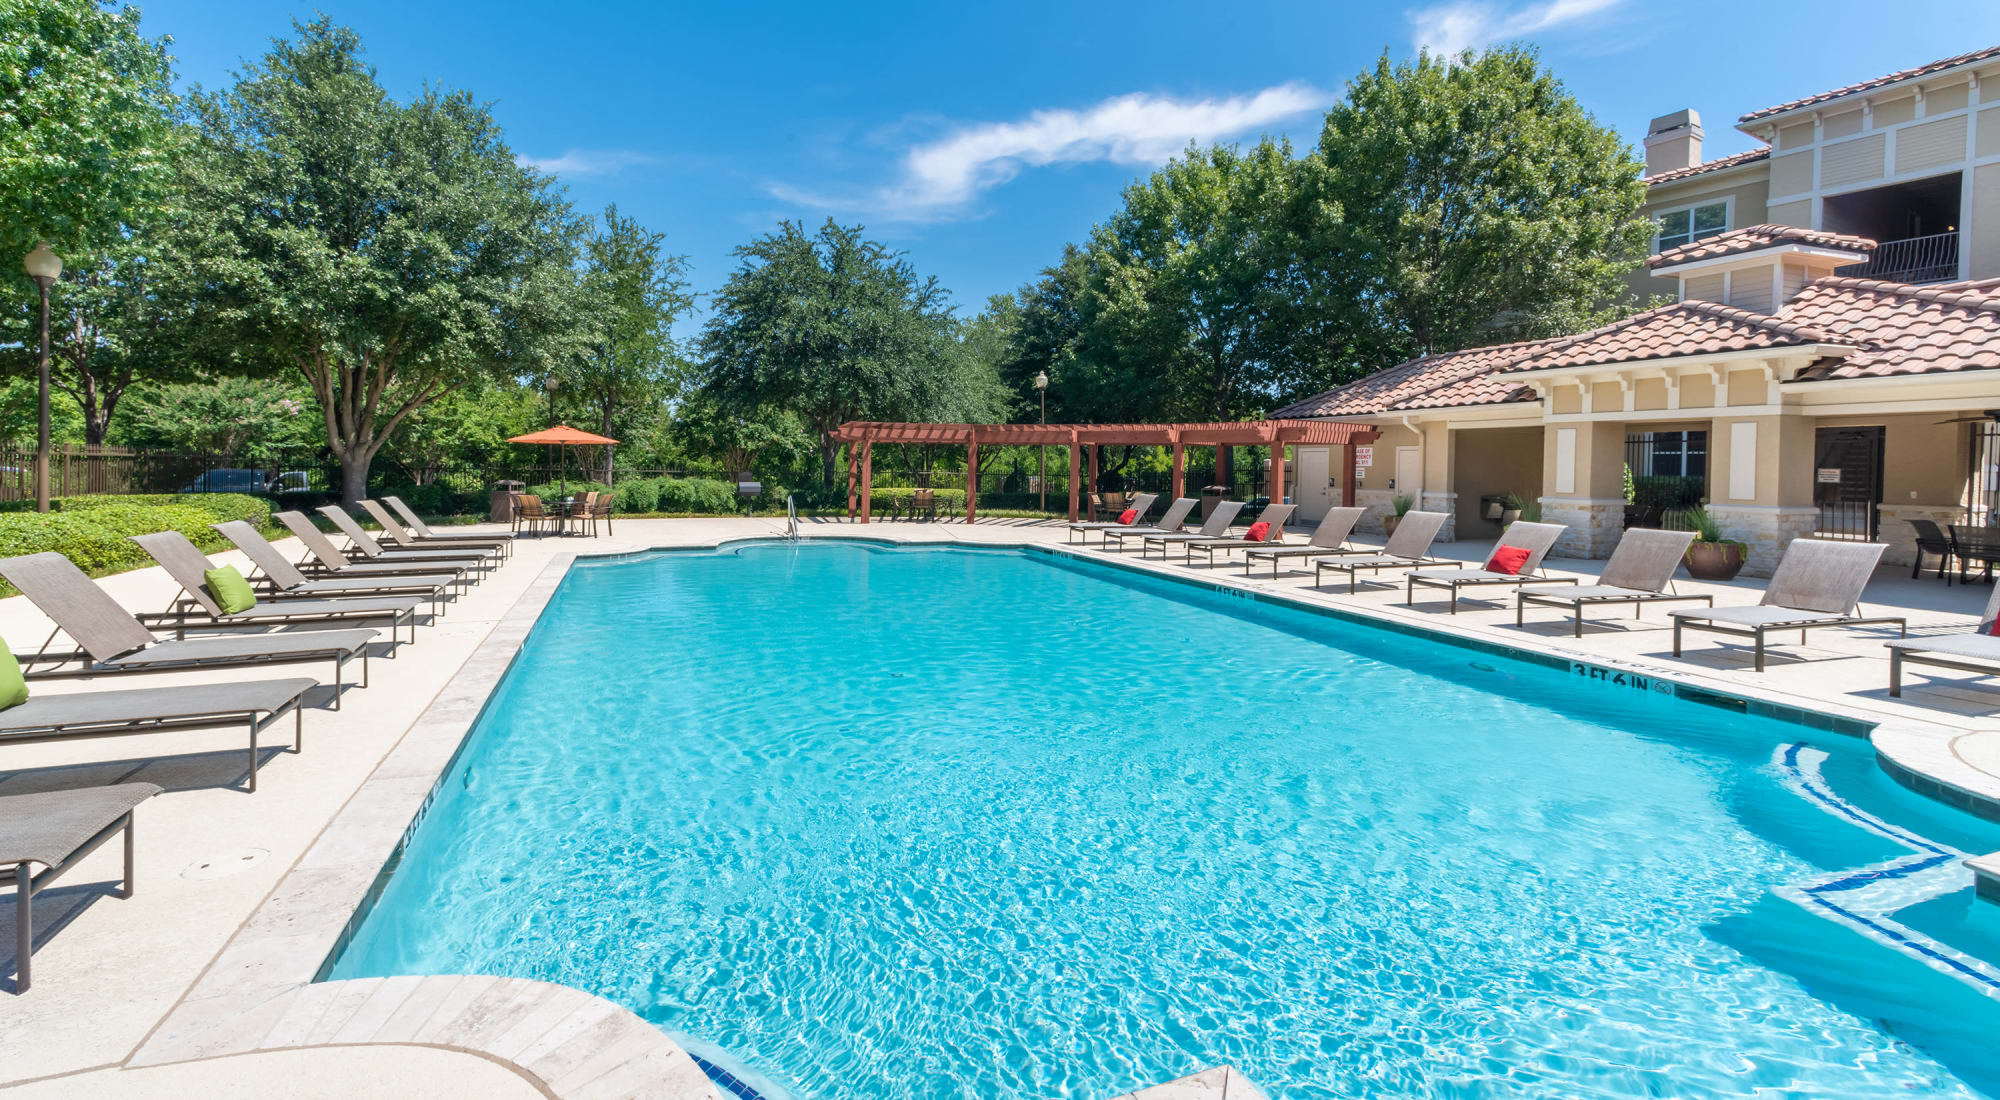 Pool with lounge chairs at Estancia at Ridgeview Ranch